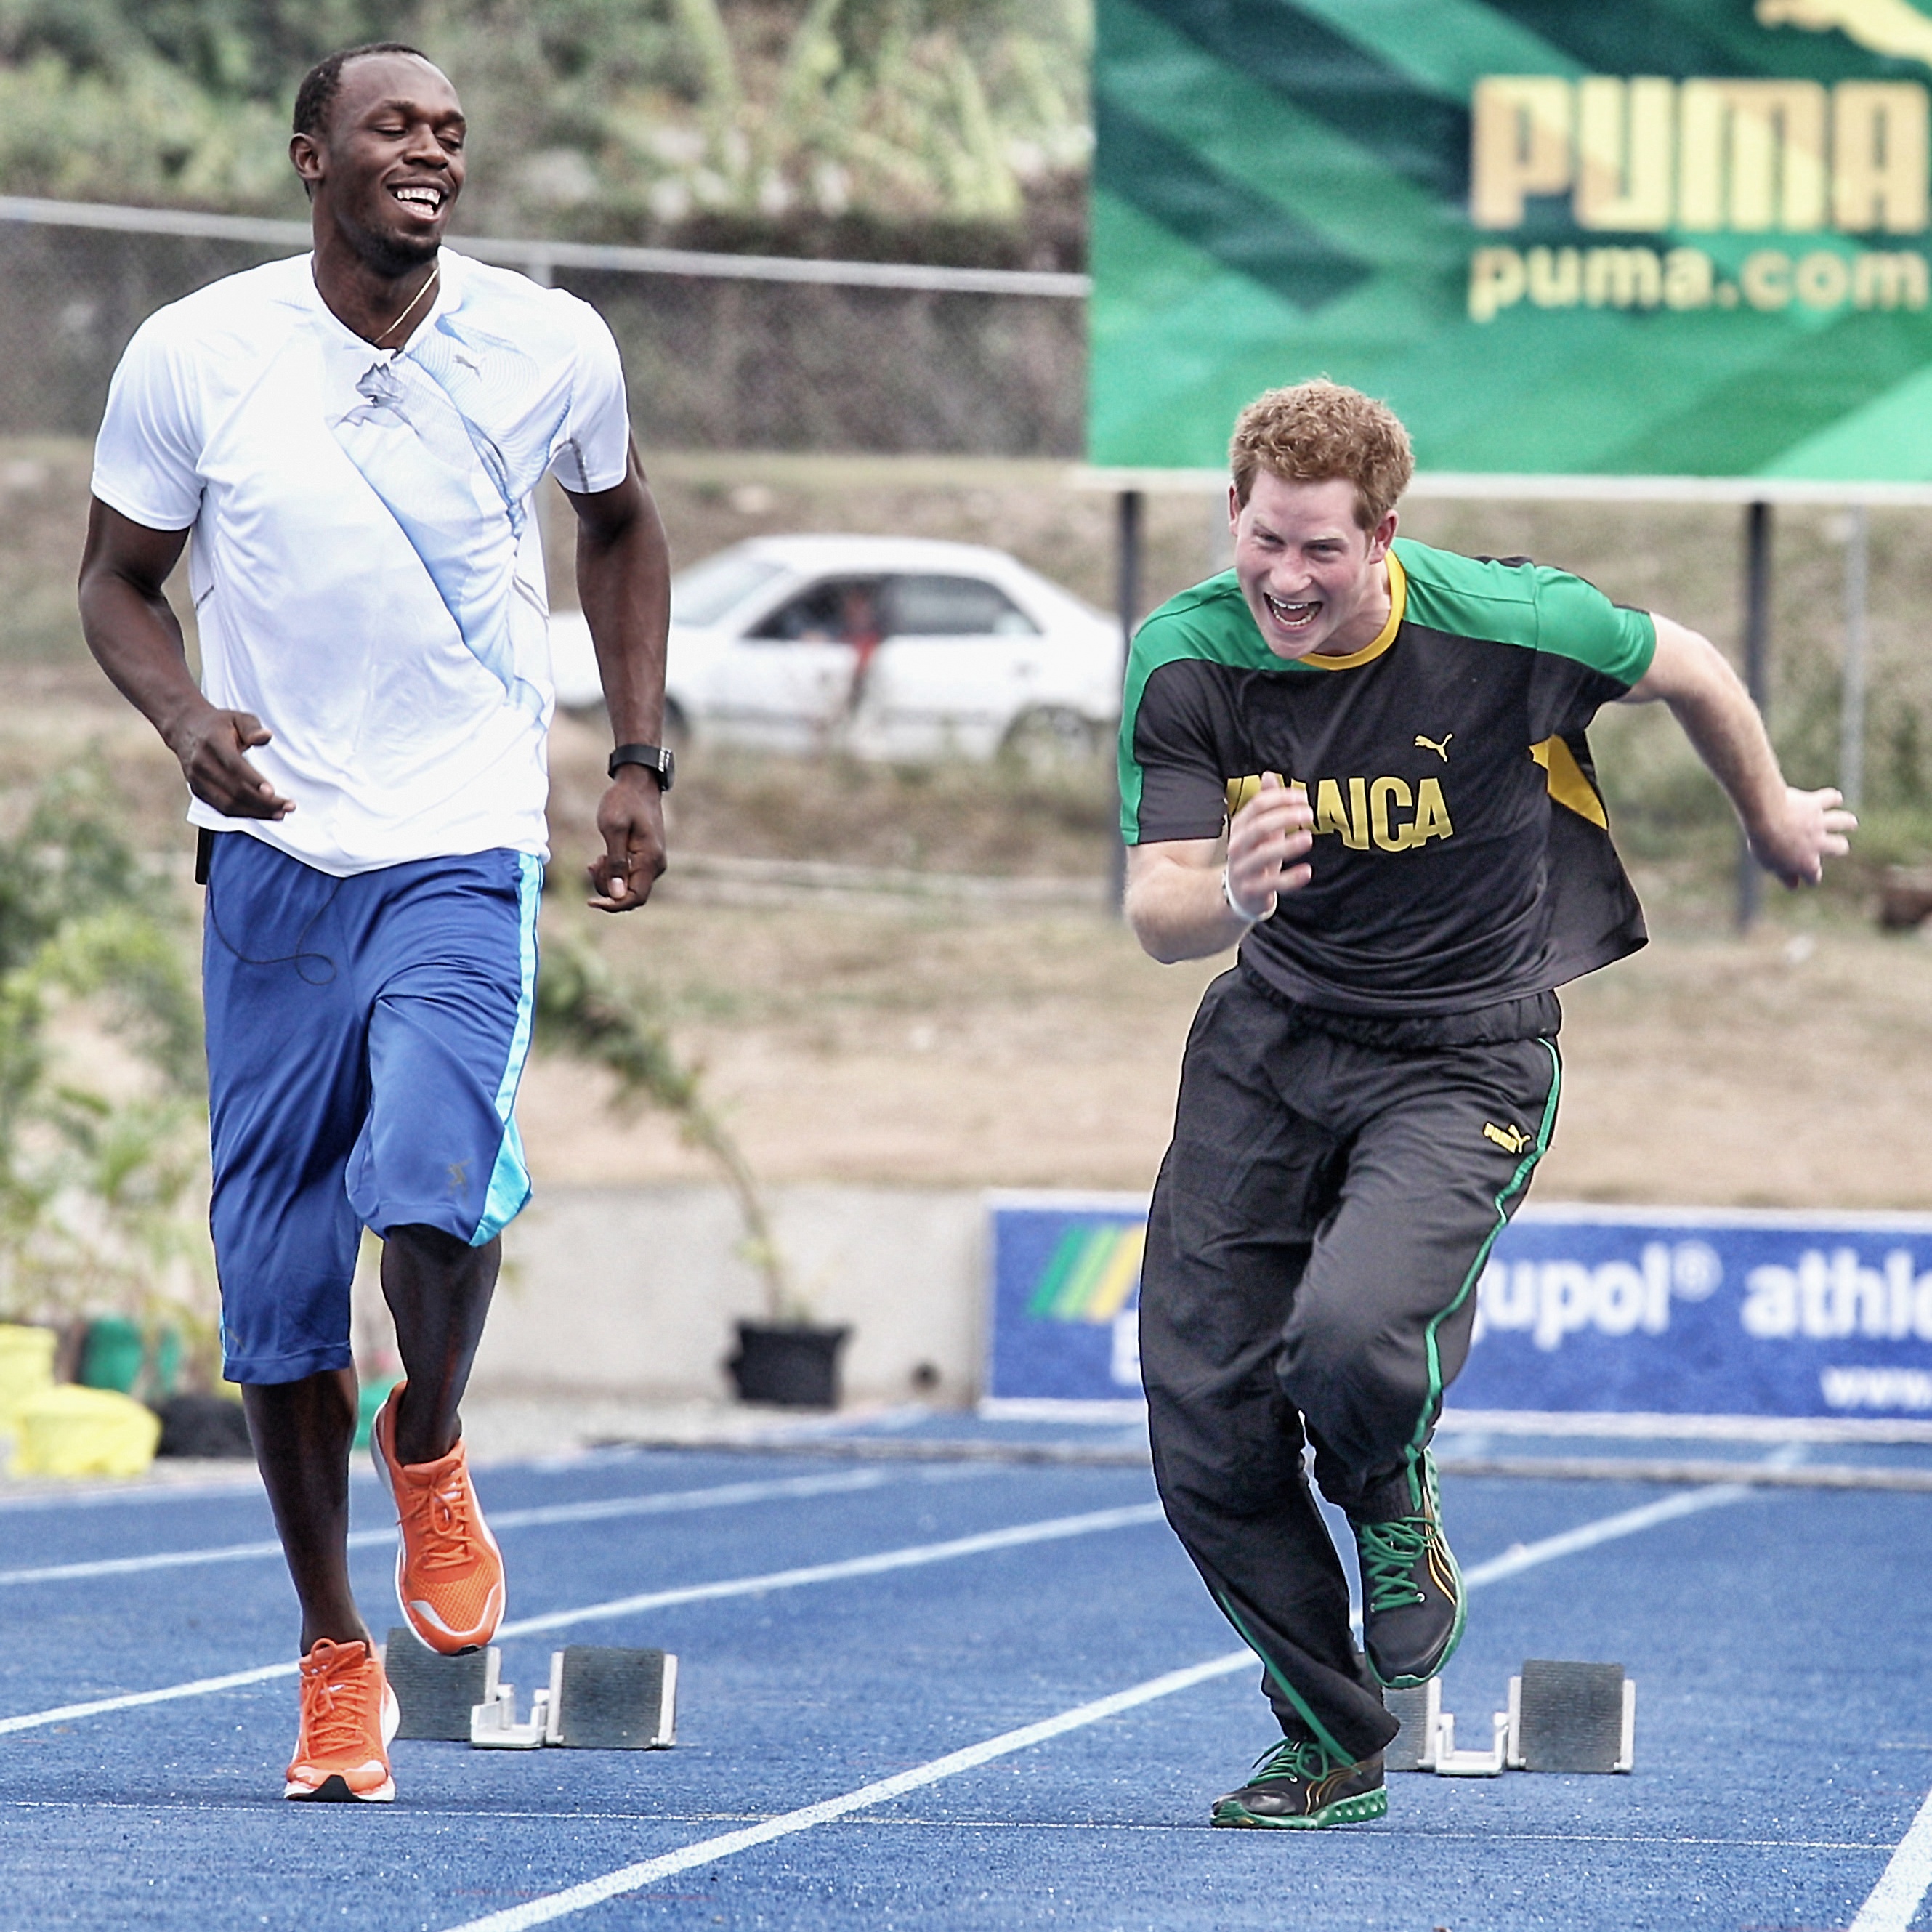 Prince Harry racing Usain Bolt on the Usain Bolt Track at the University of the West Indies